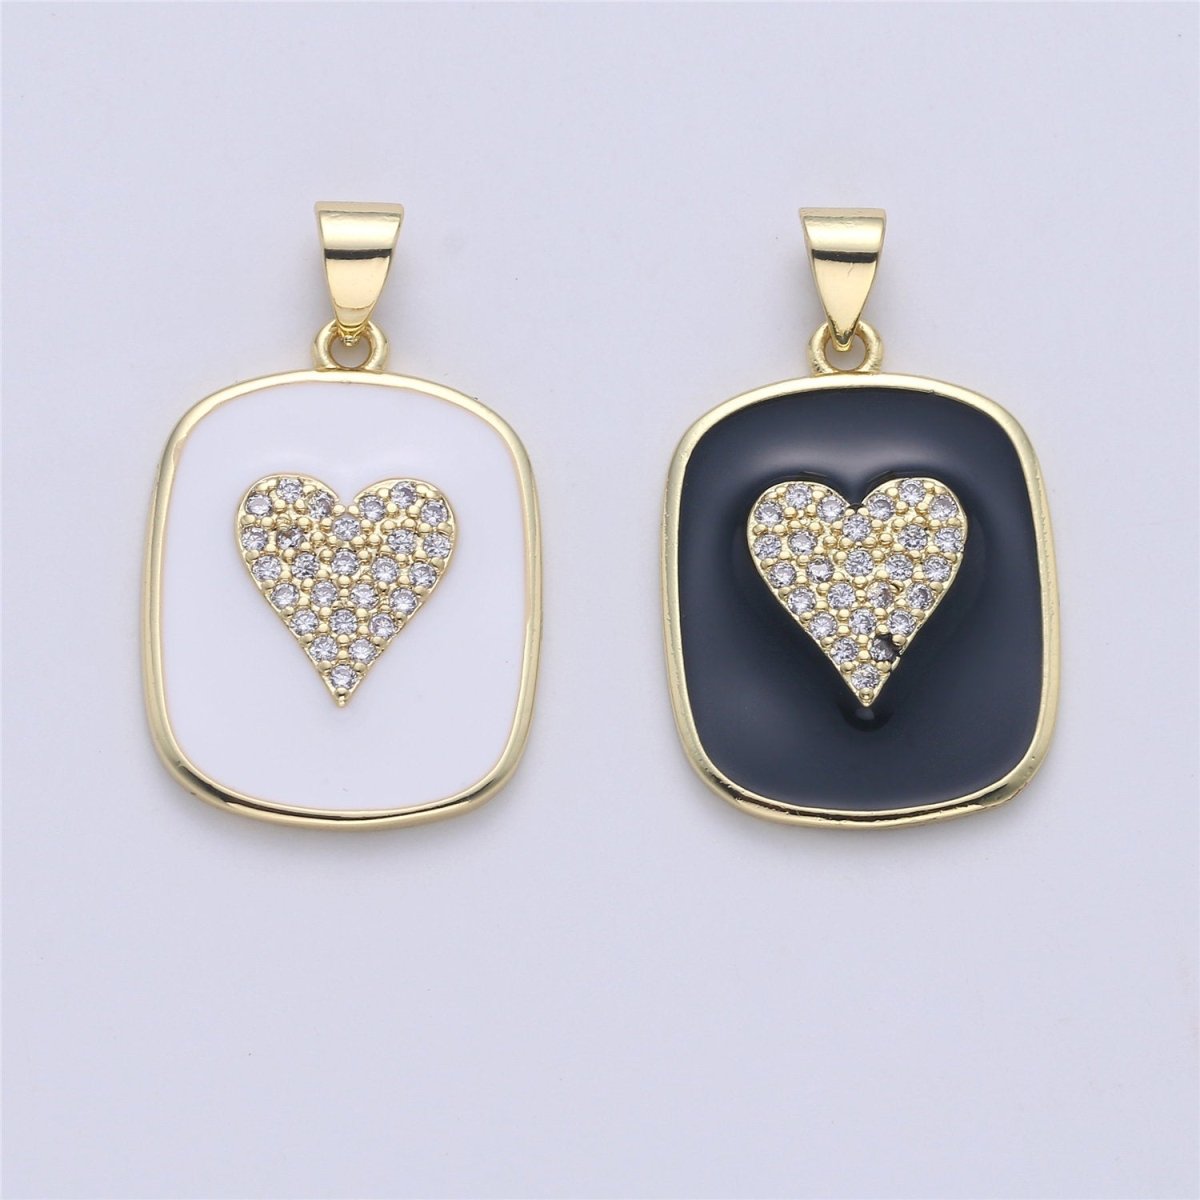 Gold Enamel Heart Charm Military Tag Pendant, Black White Love charm, Enamel Jewelry for Necklace Component I-448 I-449 - DLUXCA